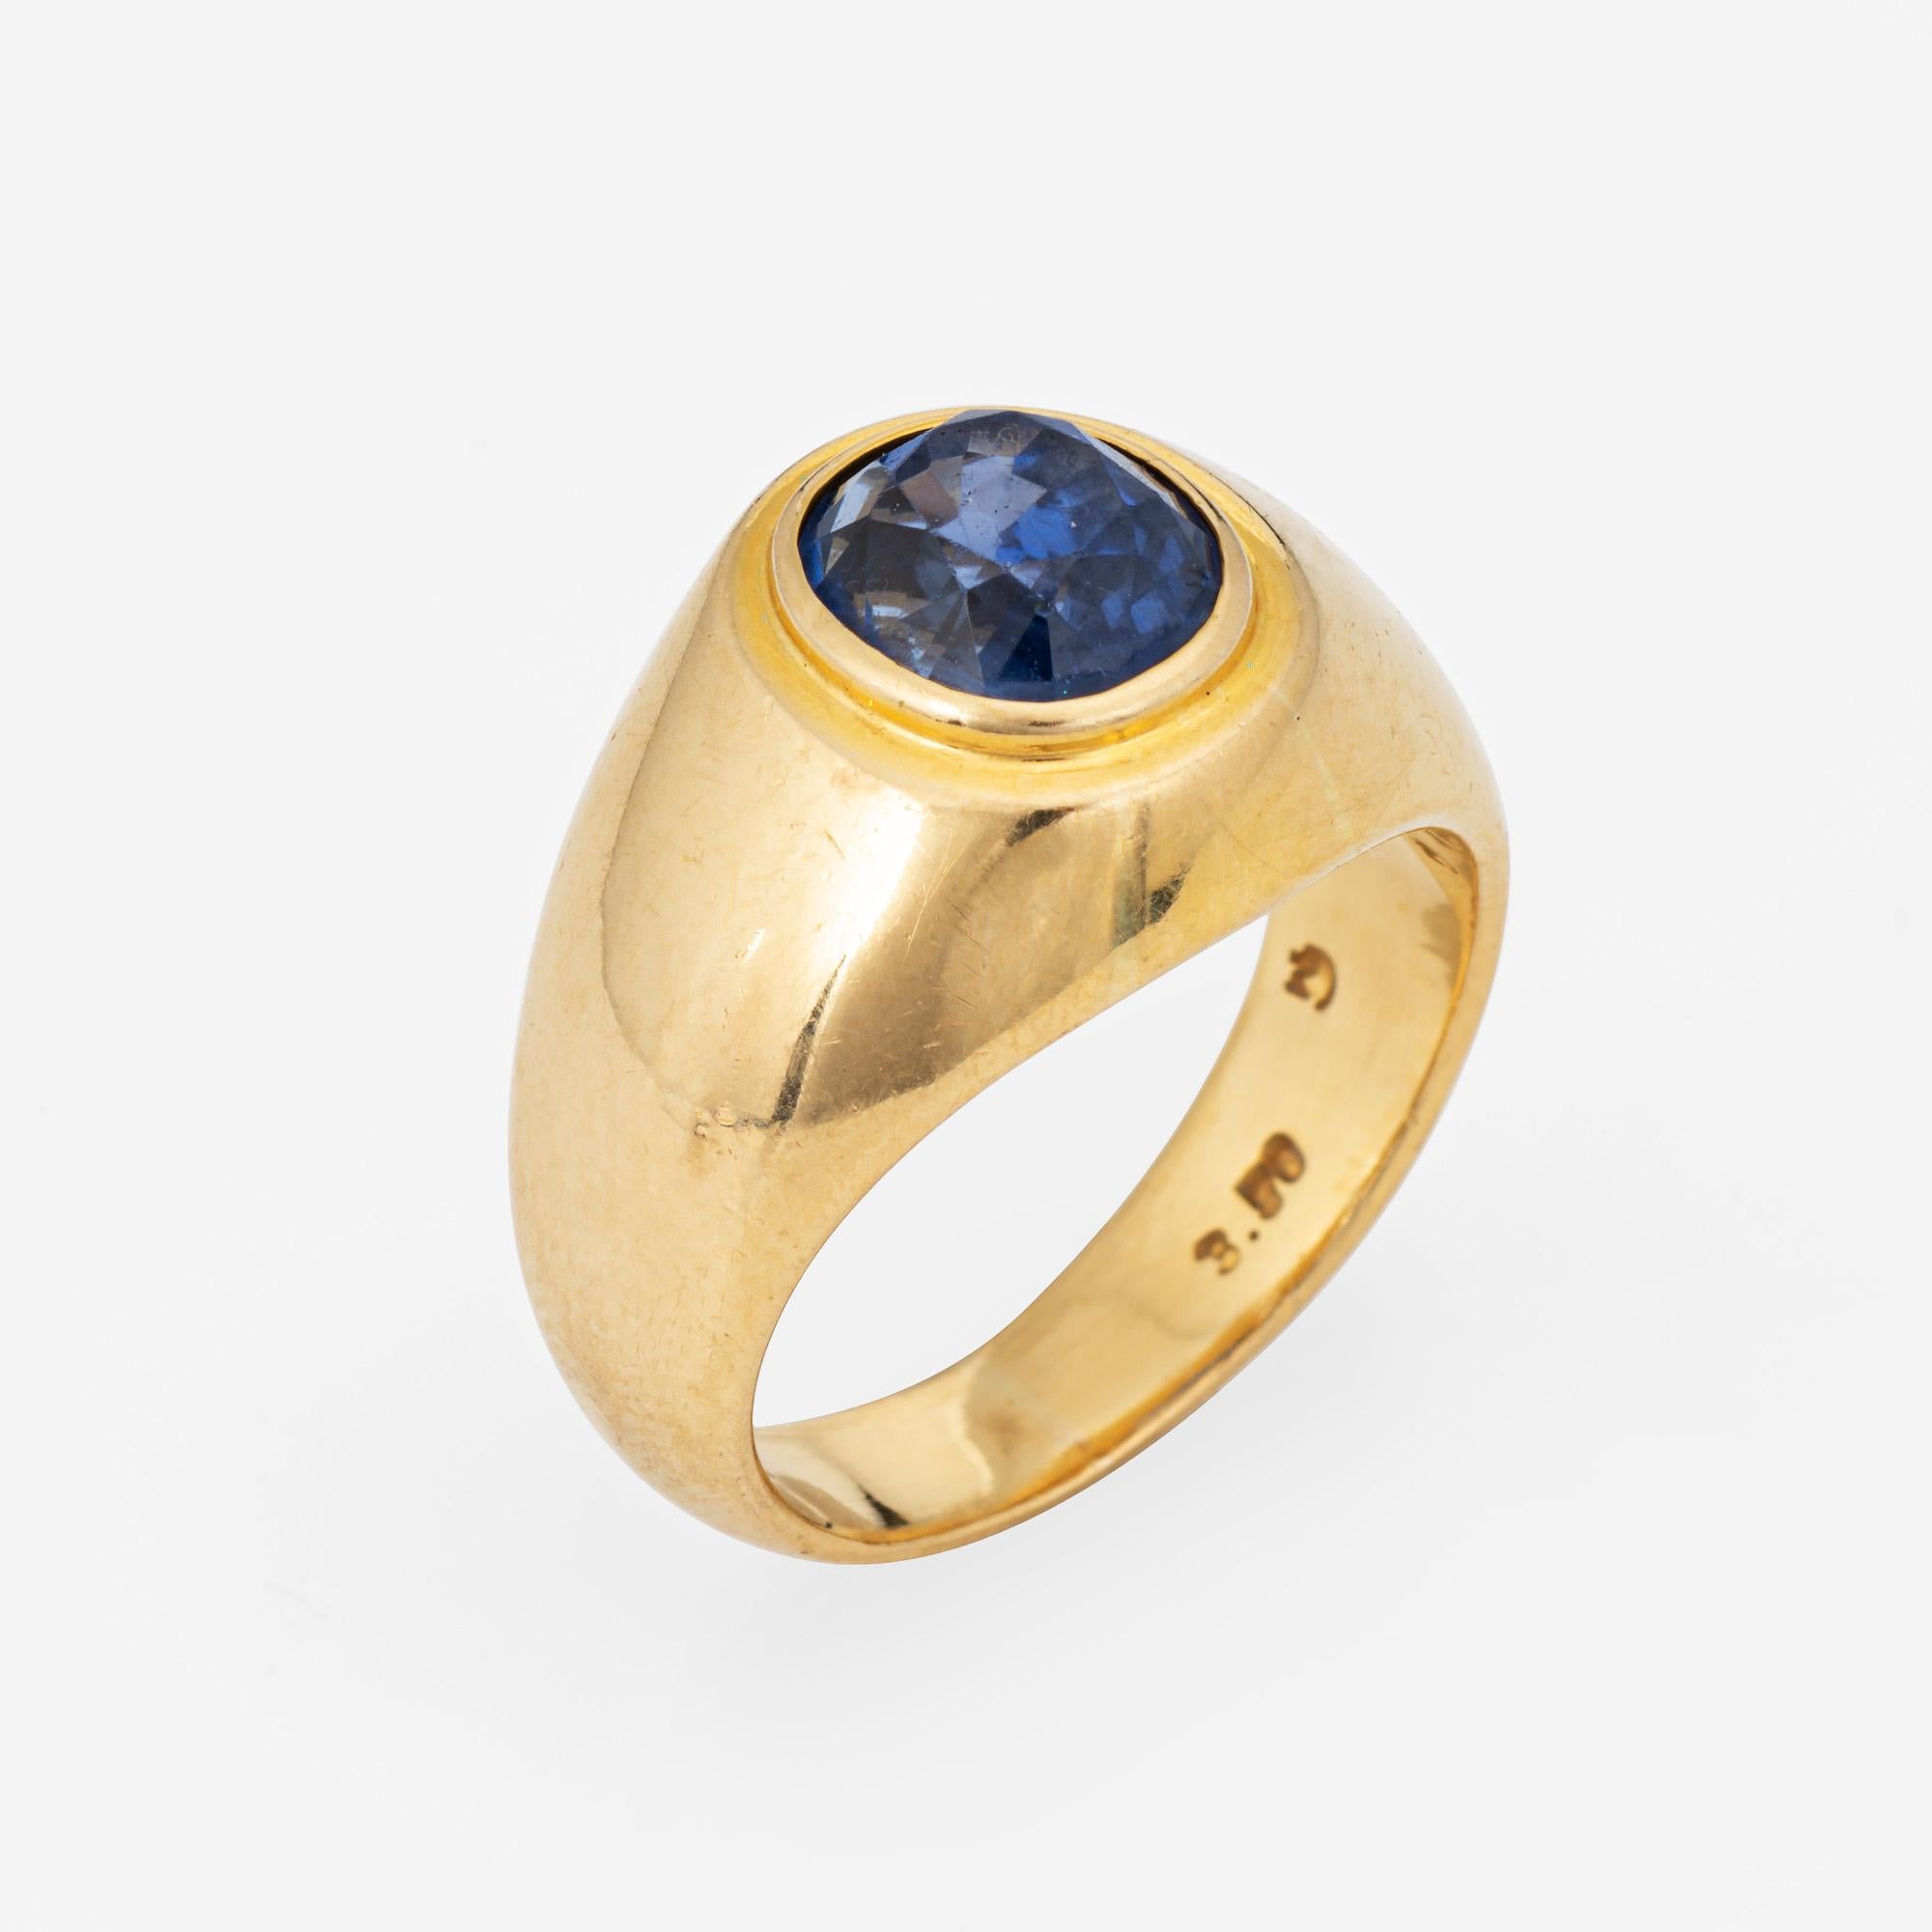 Stylish vintage natural Ceylon sapphire signet ring (circa 1990s) crafted in 18 karat yellow gold. 

Oval mixed cut natural sapphire measures 8.5mm x 7.8mm x 6.6mm (estimated at 3.50 carats). The sapphire is medium blue in color, lightly included,